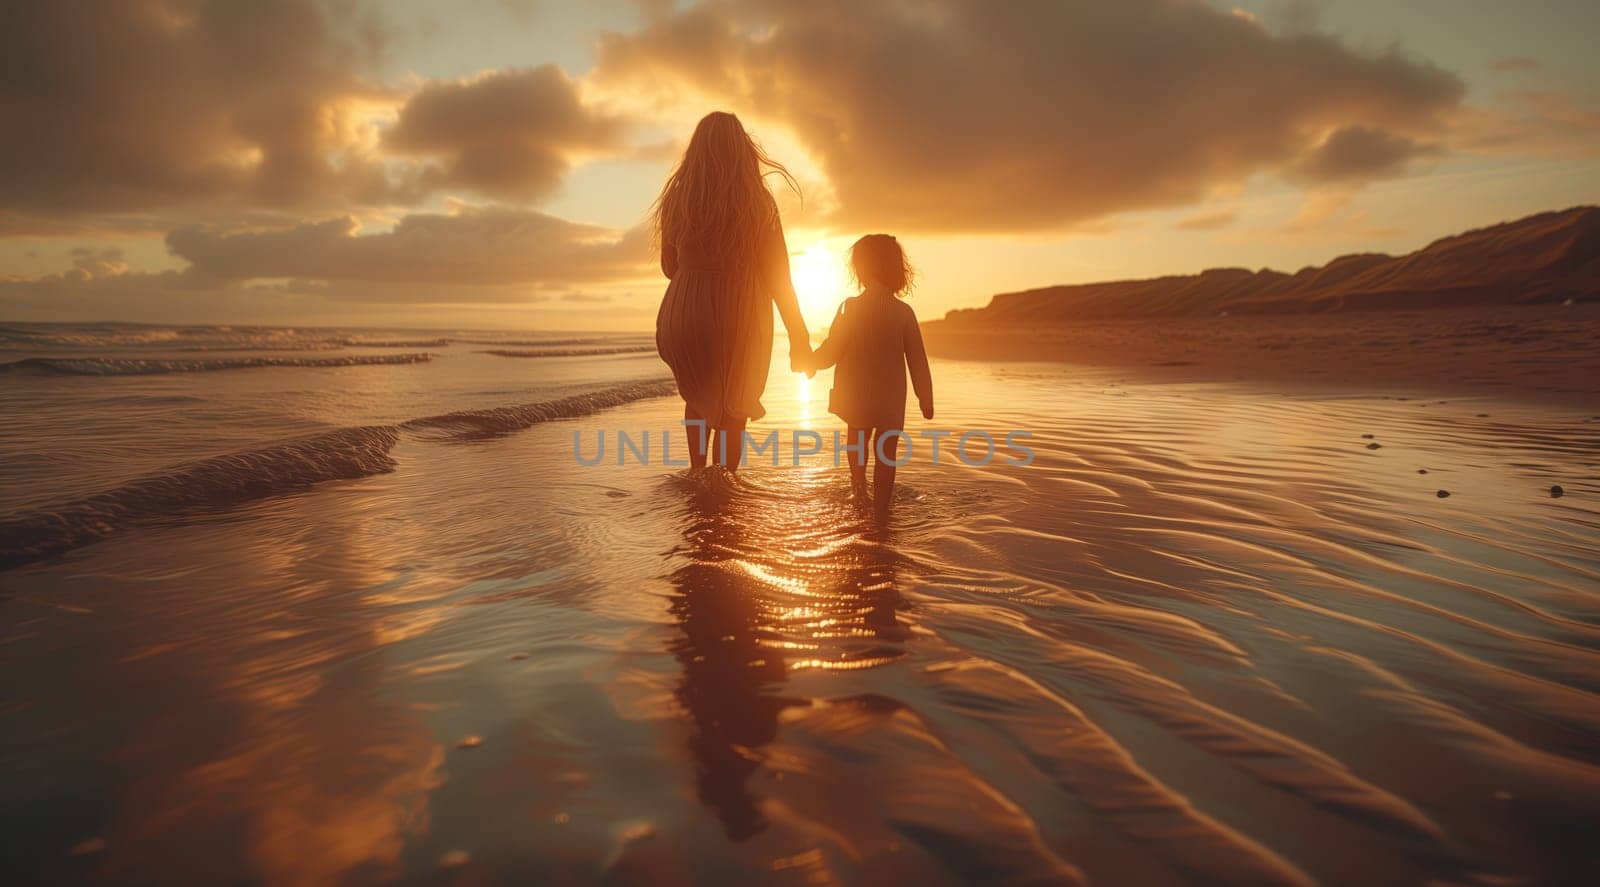 A woman and a child stroll along the beach at sunset, hand in hand, under the colorful sky and gentle clouds, enjoying the serene natural landscape